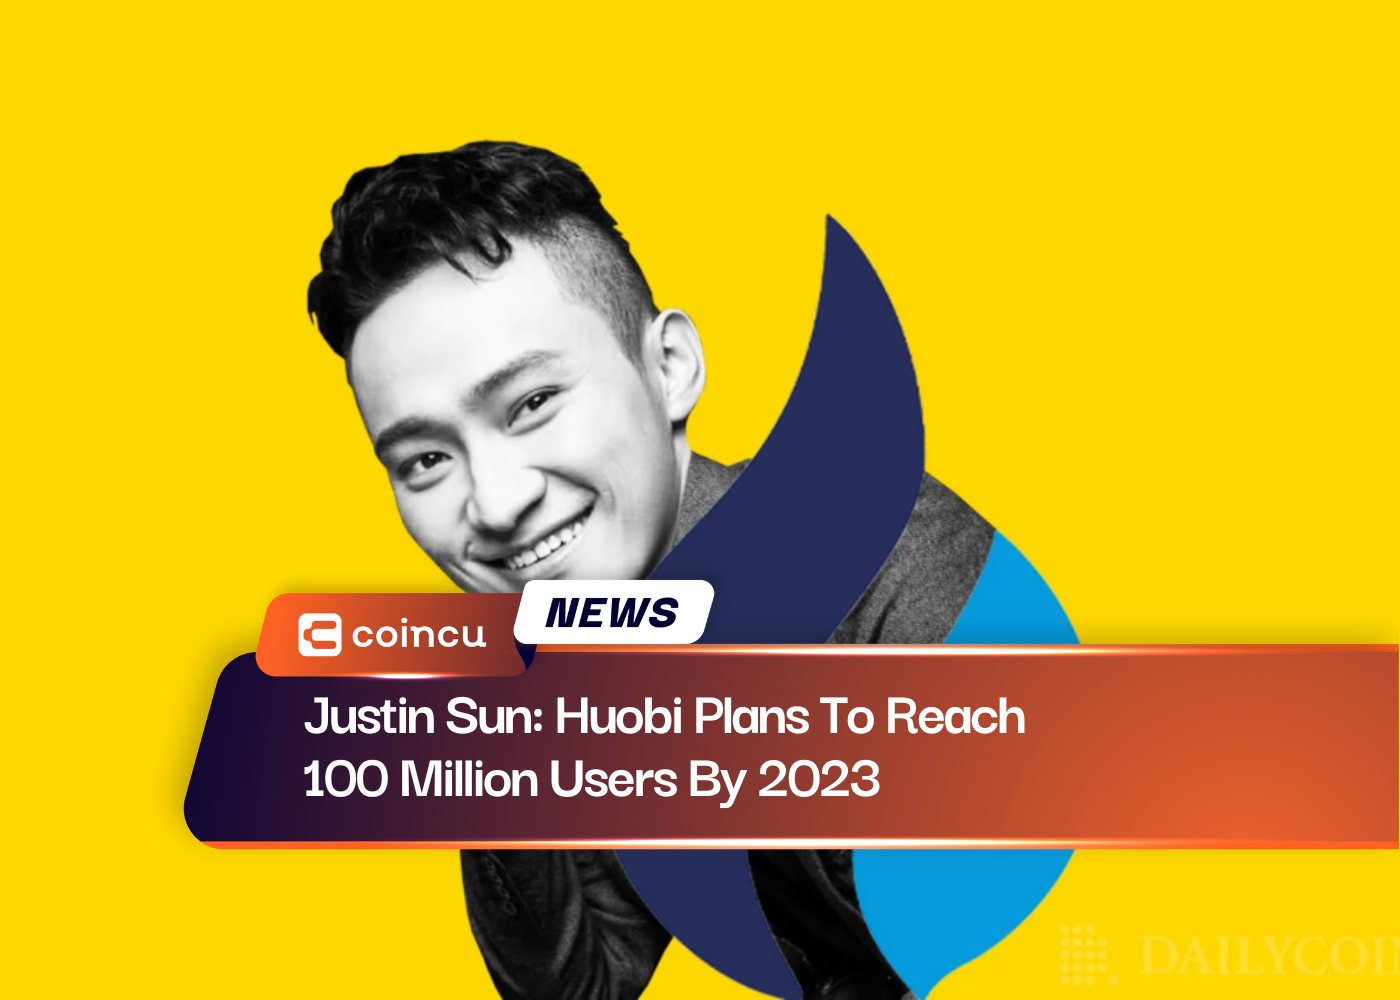 Justin Sun: Huobi Plans To Reach 100 Million Users By 2023